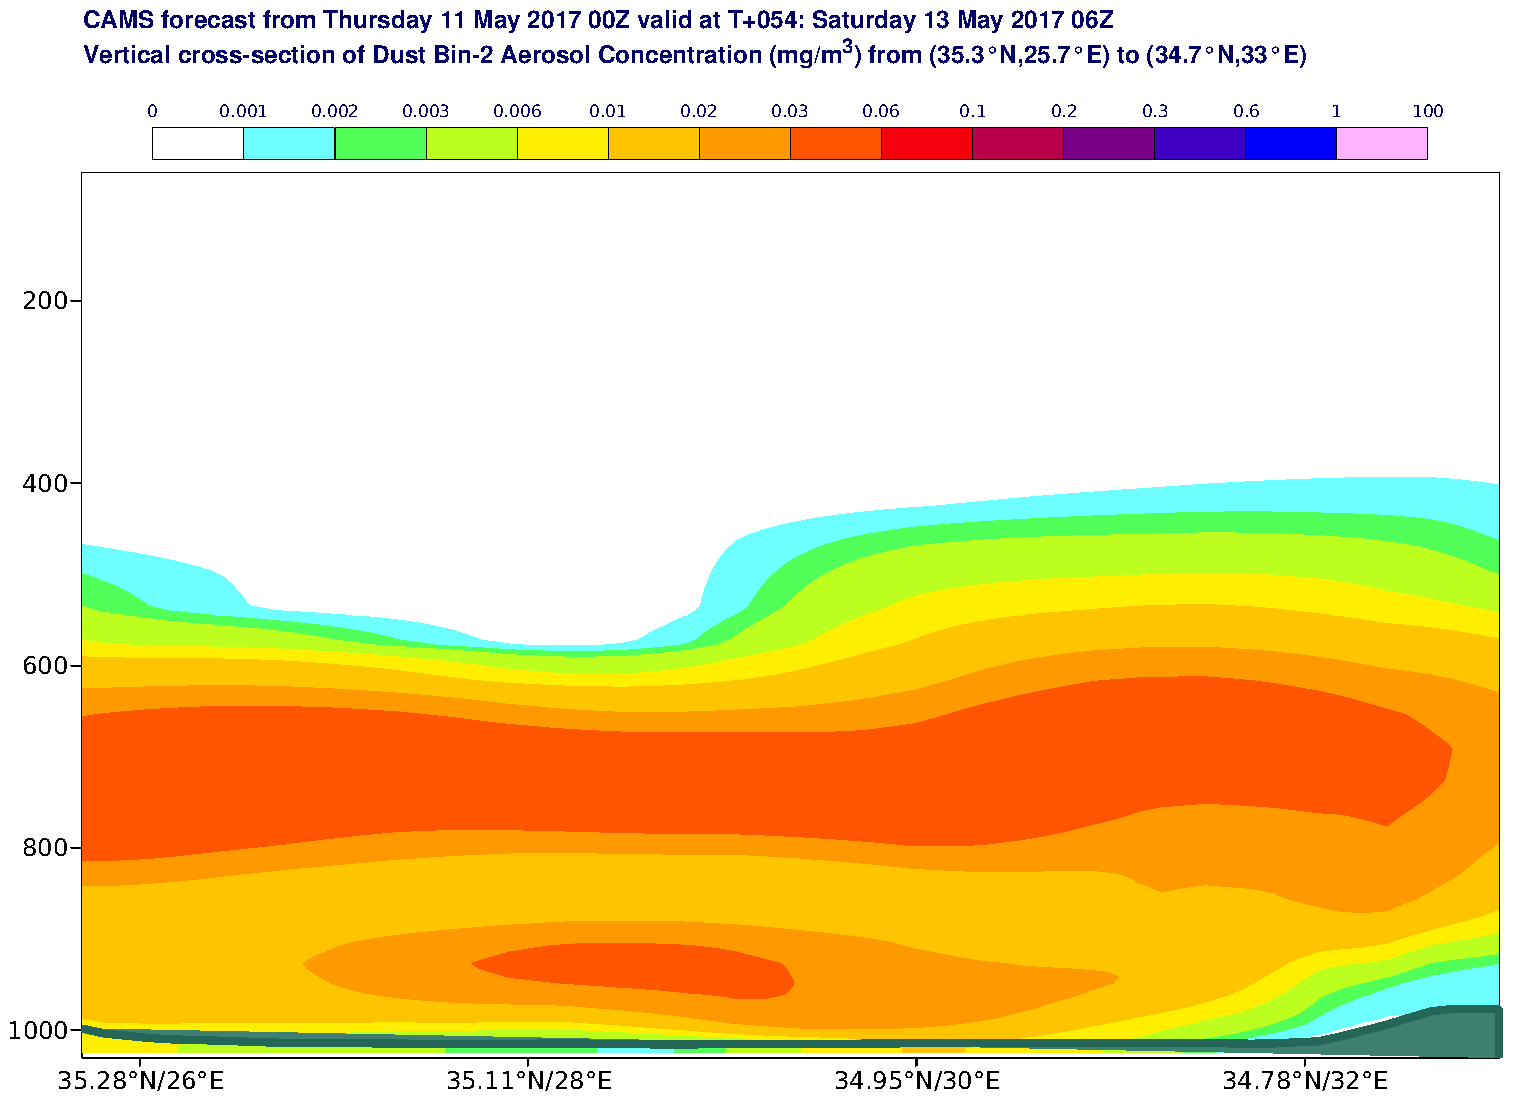 Vertical cross-section of Dust Bin-2 Aerosol Concentration (mg/m3) valid at T54 - 2017-05-13 06:00